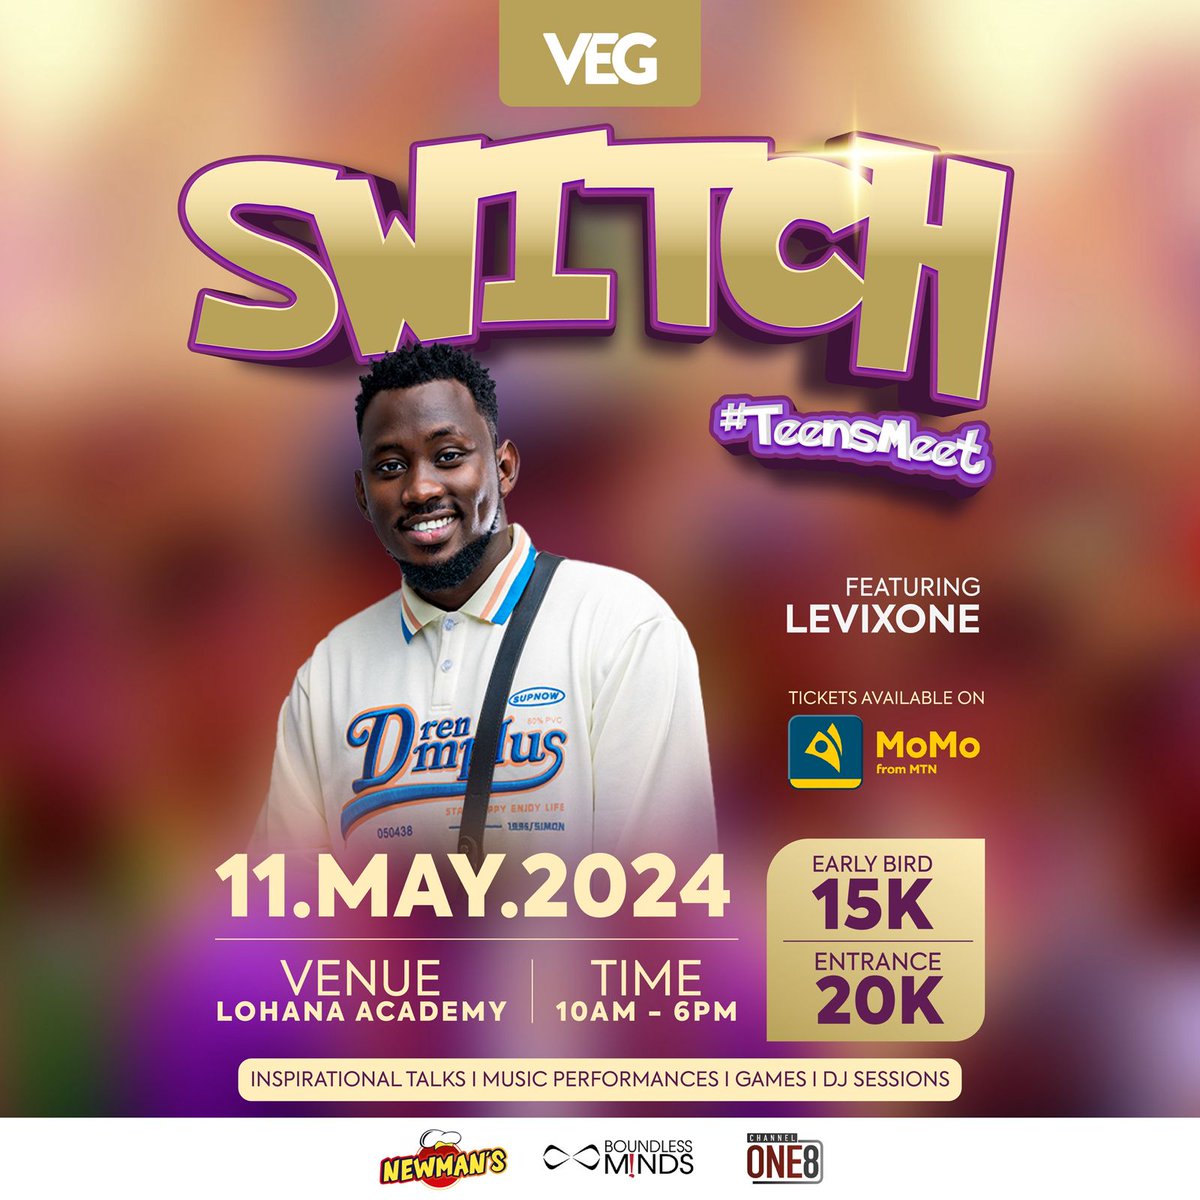 Introducing the award-winning, international artist, @levixone .With his unparalleled talent and creativity, he has captured the hearts of audiences worldwide. Prepare to be inspired this 11th May at Lohana Academy for only 15k via @mtnmomoug #Switch2024